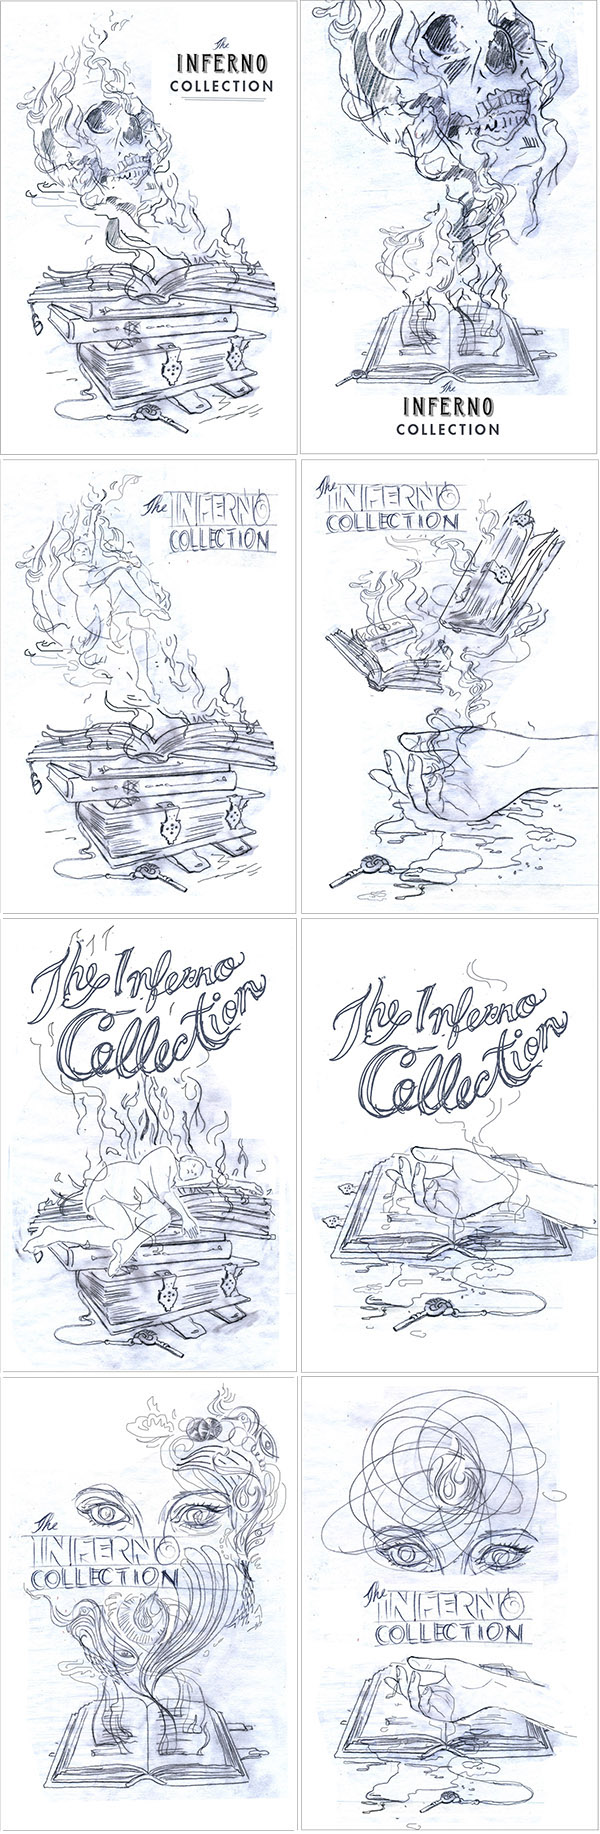 books book covers publishing   art skull fire Flames harlequin mystery book book art Cover Art jacqui oakley process sketches